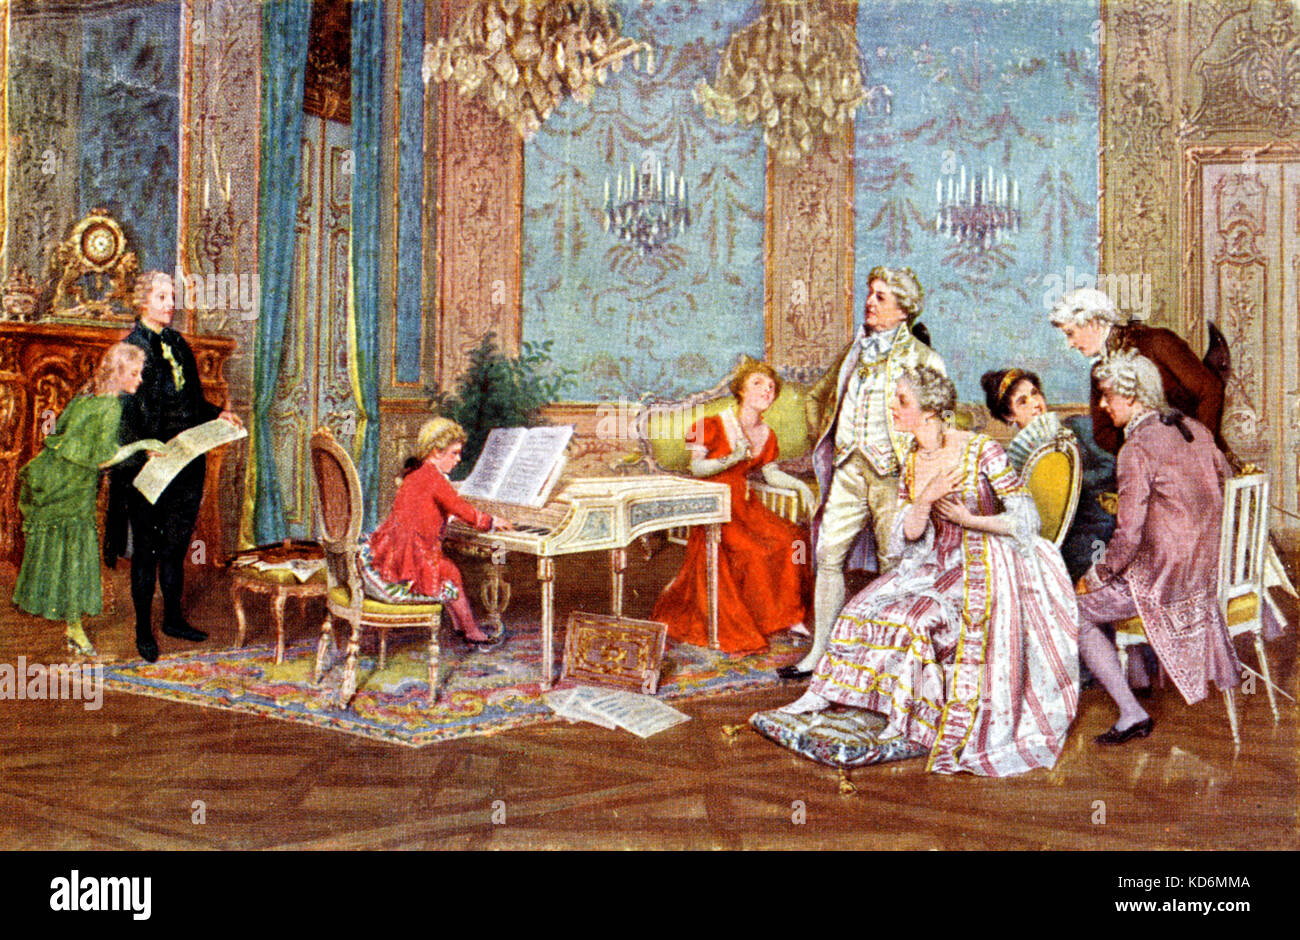 Wolfgang Amadeus Mozart as a child playing the at the Kaiserhof (Kaiser court) in Vienna, Austria Austrian composer, 27 January 1756 - 5 December 1791. Stock Photo